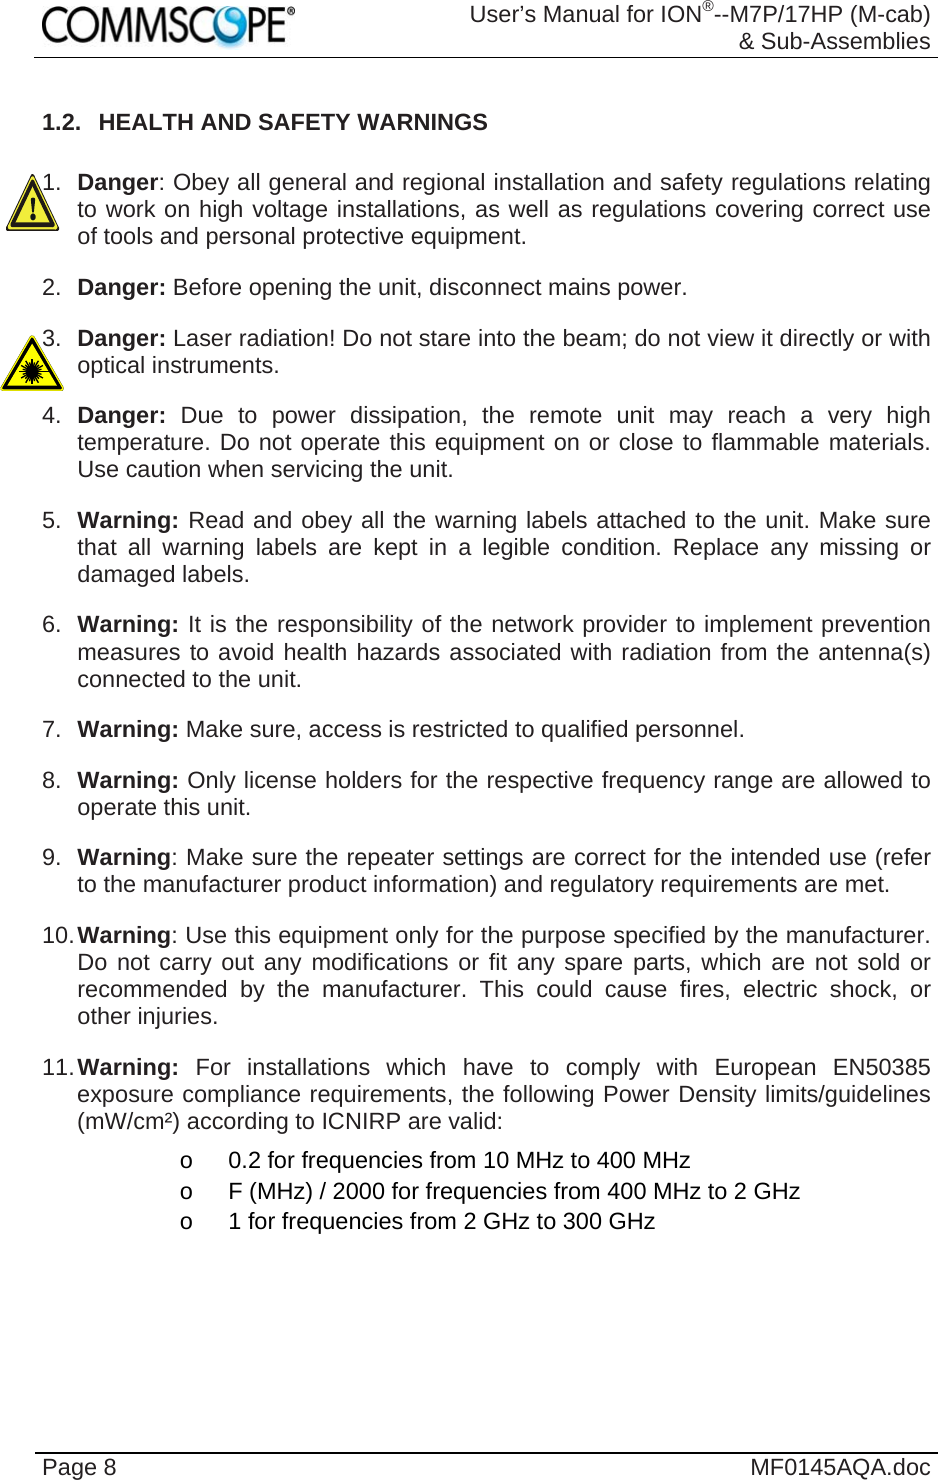  User’s Manual for ION®--M7P/17HP (M-cab) &amp; Sub-Assemblies Page 8  MF0145AQA.doc 1.2.  HEALTH AND SAFETY WARNINGS  1.  Danger: Obey all general and regional installation and safety regulations relating to work on high voltage installations, as well as regulations covering correct use of tools and personal protective equipment. 2.  Danger: Before opening the unit, disconnect mains power. 3.  Danger: Laser radiation! Do not stare into the beam; do not view it directly or with optical instruments. 4.  Danger:  Due to power dissipation, the remote unit may reach a very high temperature. Do not operate this equipment on or close to flammable materials. Use caution when servicing the unit. 5.  Warning: Read and obey all the warning labels attached to the unit. Make sure that all warning labels are kept in a legible condition. Replace any missing or damaged labels. 6.  Warning: It is the responsibility of the network provider to implement prevention measures to avoid health hazards associated with radiation from the antenna(s) connected to the unit. 7.  Warning: Make sure, access is restricted to qualified personnel. 8.  Warning: Only license holders for the respective frequency range are allowed to operate this unit. 9.  Warning: Make sure the repeater settings are correct for the intended use (refer to the manufacturer product information) and regulatory requirements are met. 10. Warning: Use this equipment only for the purpose specified by the manufacturer. Do not carry out any modifications or fit any spare parts, which are not sold or recommended by the manufacturer. This could cause fires, electric shock, or other injuries. 11. Warning: For installations which have to comply with European EN50385 exposure compliance requirements, the following Power Density limits/guidelines (mW/cm²) according to ICNIRP are valid: o  0.2 for frequencies from 10 MHz to 400 MHz o  F (MHz) / 2000 for frequencies from 400 MHz to 2 GHz o  1 for frequencies from 2 GHz to 300 GHz 